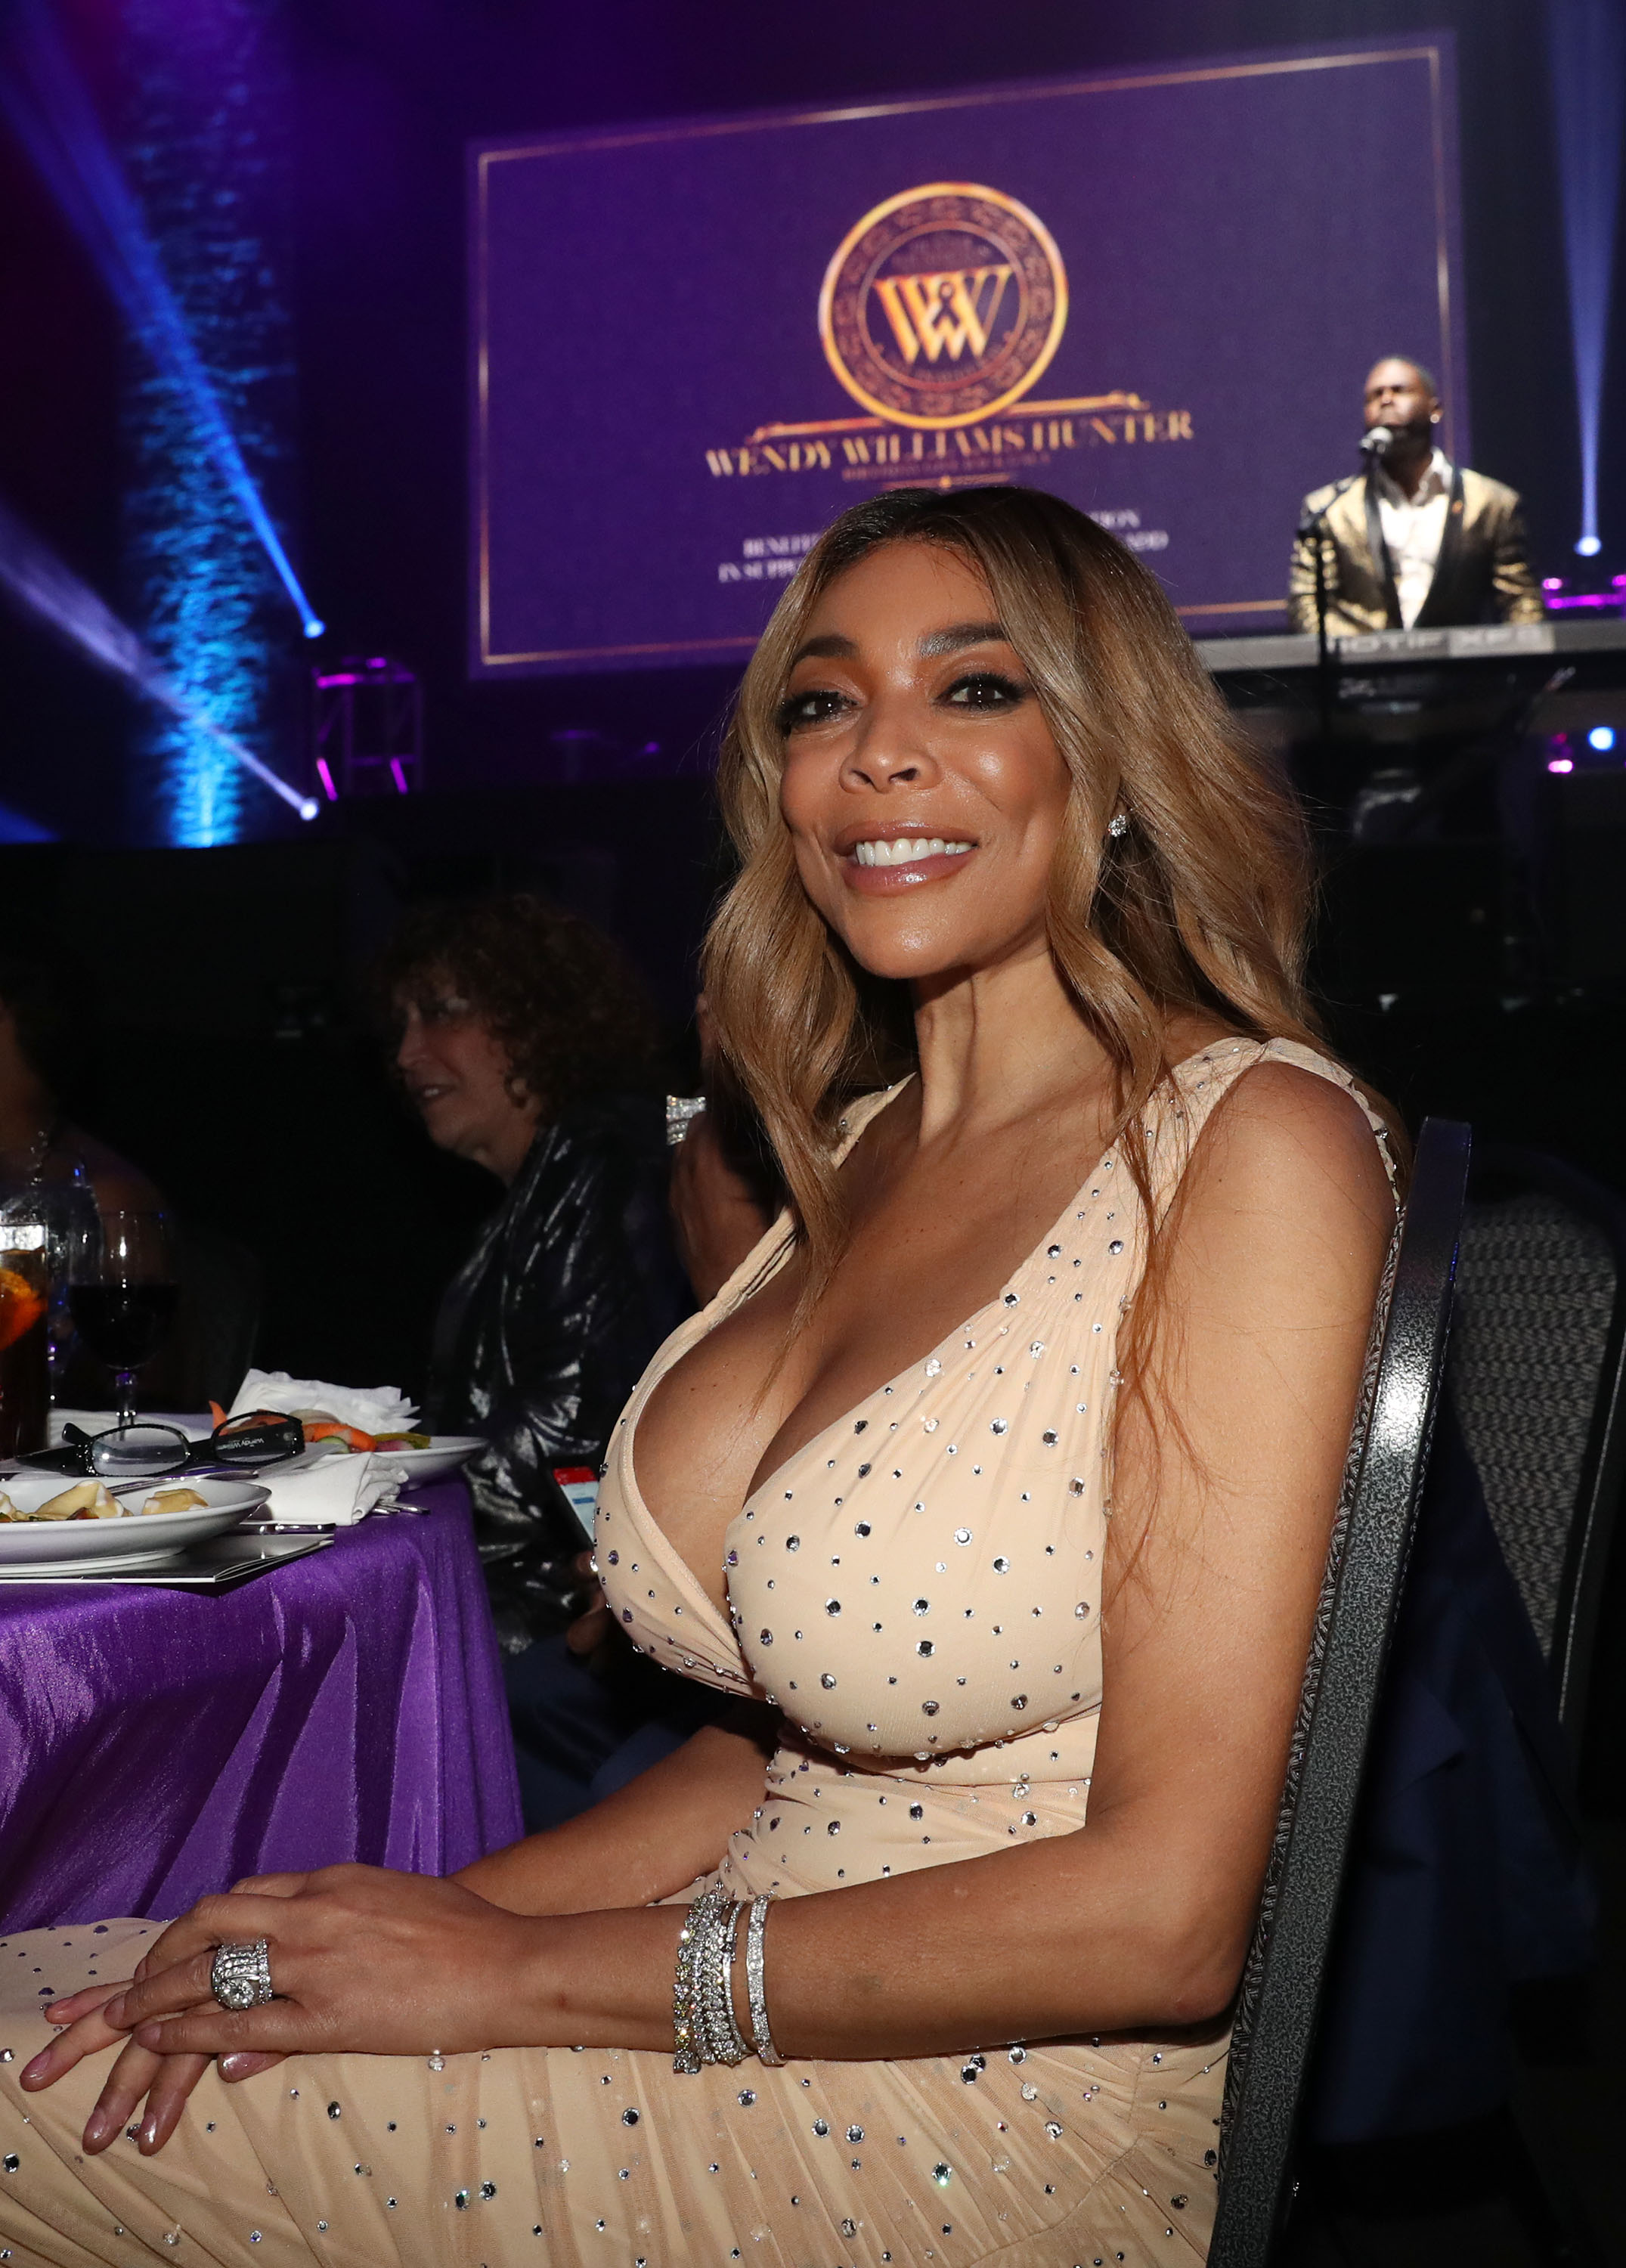 barrie webb recommends wendy williams big breast pic